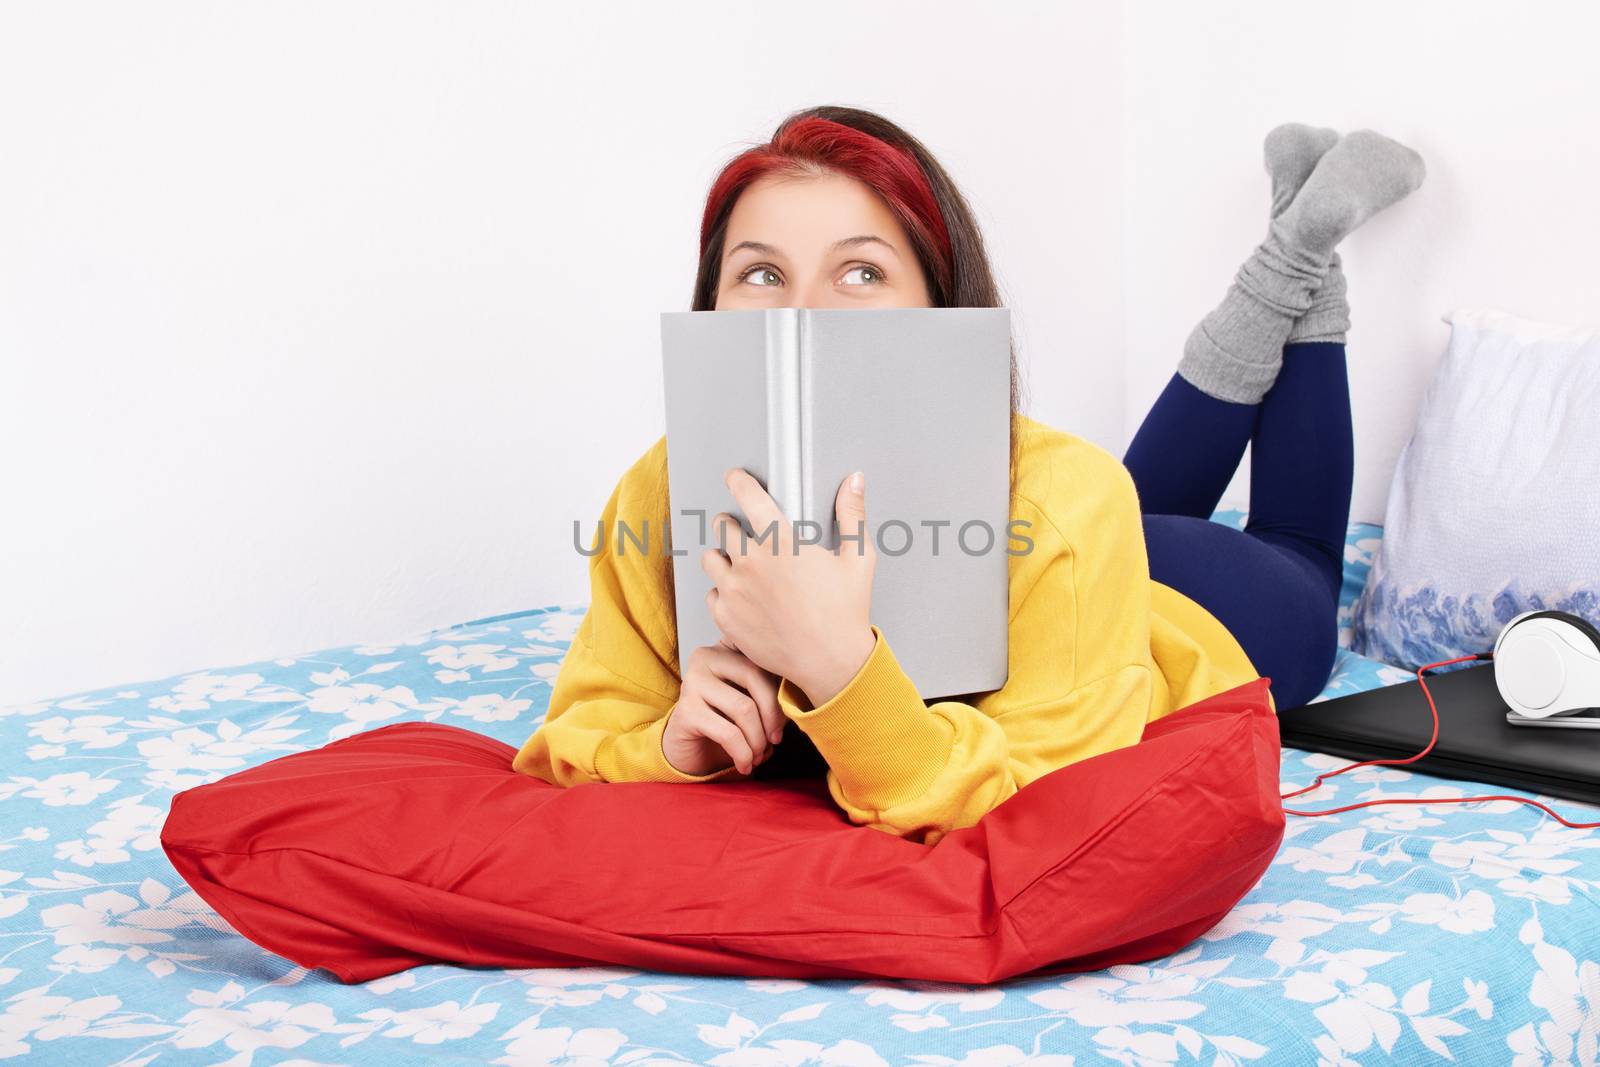 Young beautiful girl lying on the bed in a bedroom, next to a laptop and headphones, holding a book over her face, trying to study but instead she is daydreaming of being somewhere else, isolated on a white background.